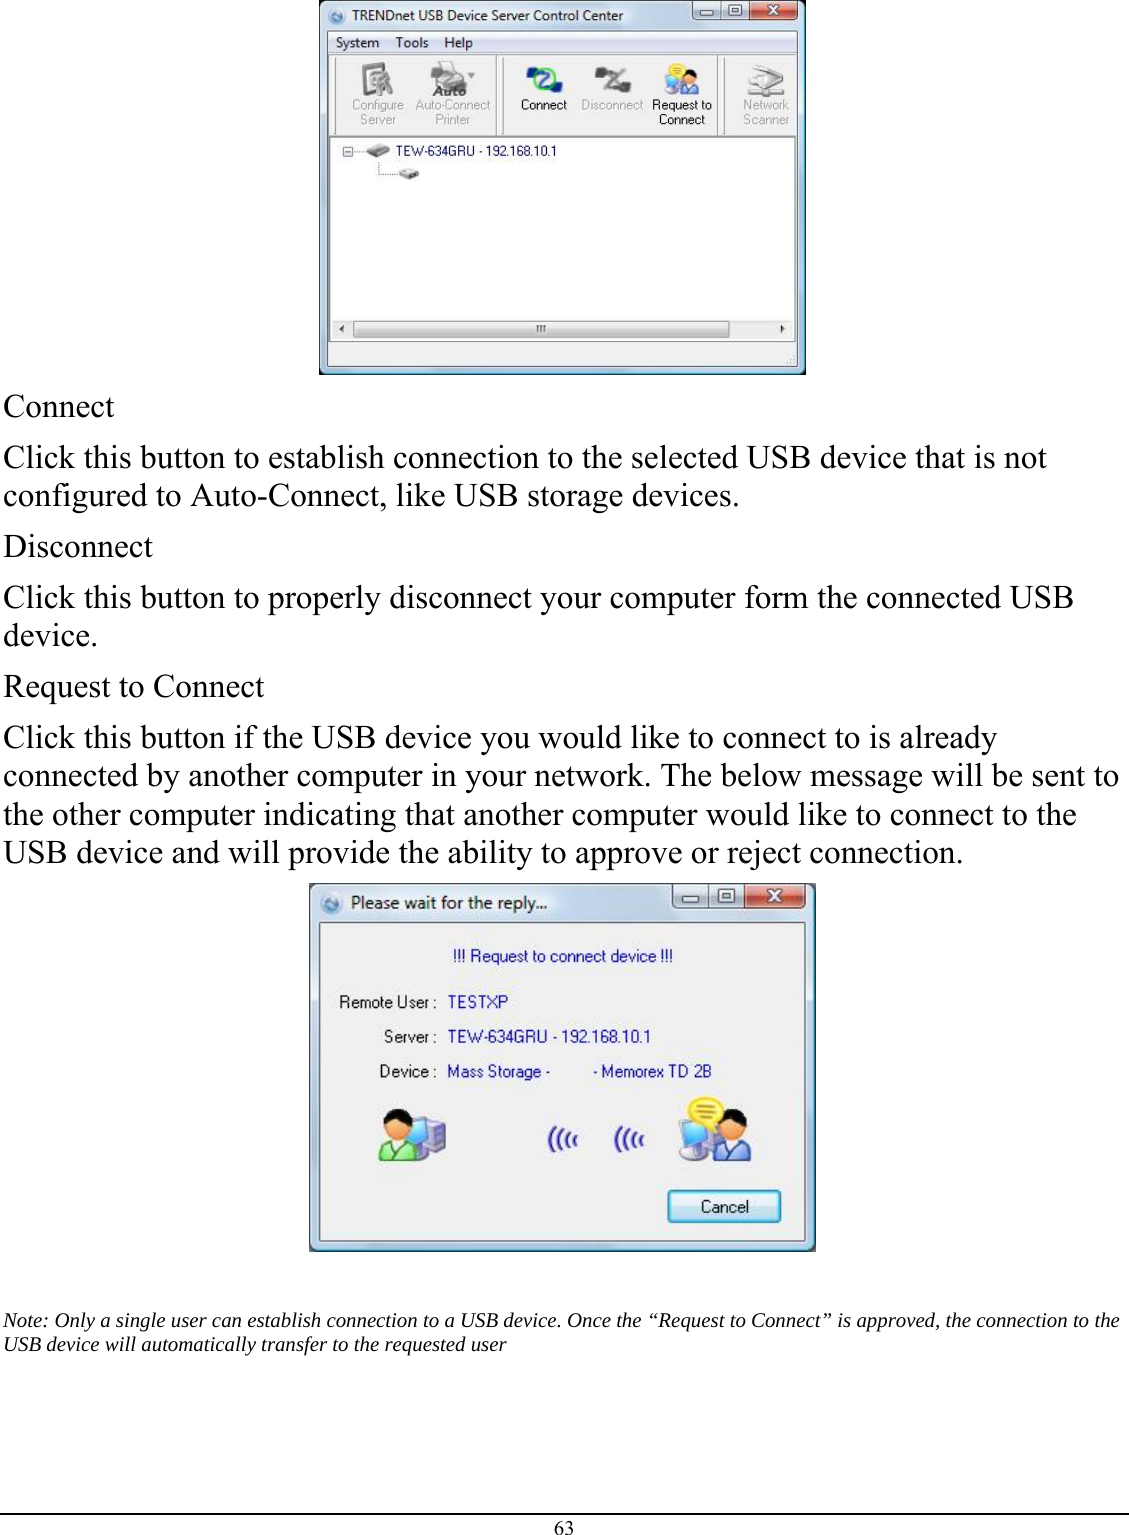 63   Connect Click this button to establish connection to the selected USB device that is not configured to Auto-Connect, like USB storage devices.  Disconnect Click this button to properly disconnect your computer form the connected USB device.  Request to Connect Click this button if the USB device you would like to connect to is already connected by another computer in your network. The below message will be sent to the other computer indicating that another computer would like to connect to the USB device and will provide the ability to approve or reject connection.    Note: Only a single user can establish connection to a USB device. Once the “Request to Connect” is approved, the connection to the USB device will automatically transfer to the requested user 